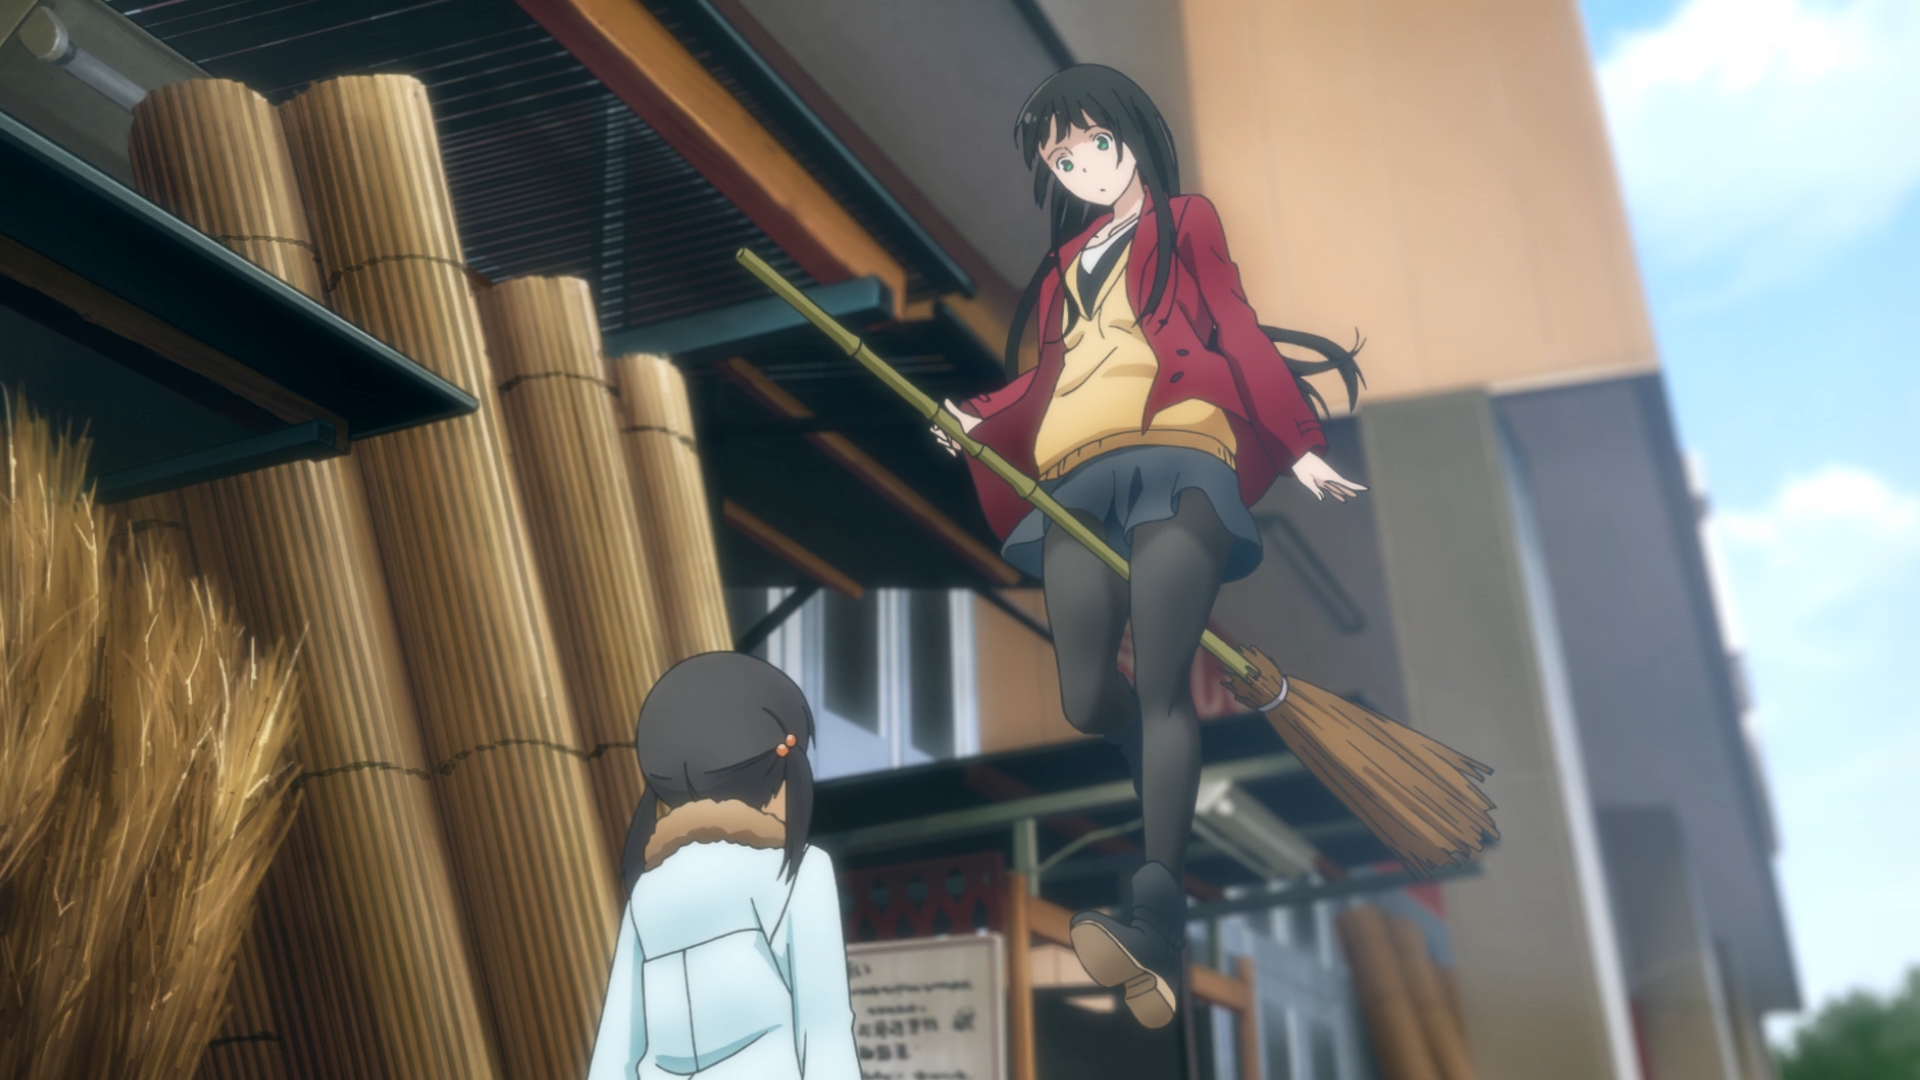 Makoto inadvertently impresses Chinatsu while testing out a bamboo broom for its hovering qualities in a scene from the Flying Witch TV anime.